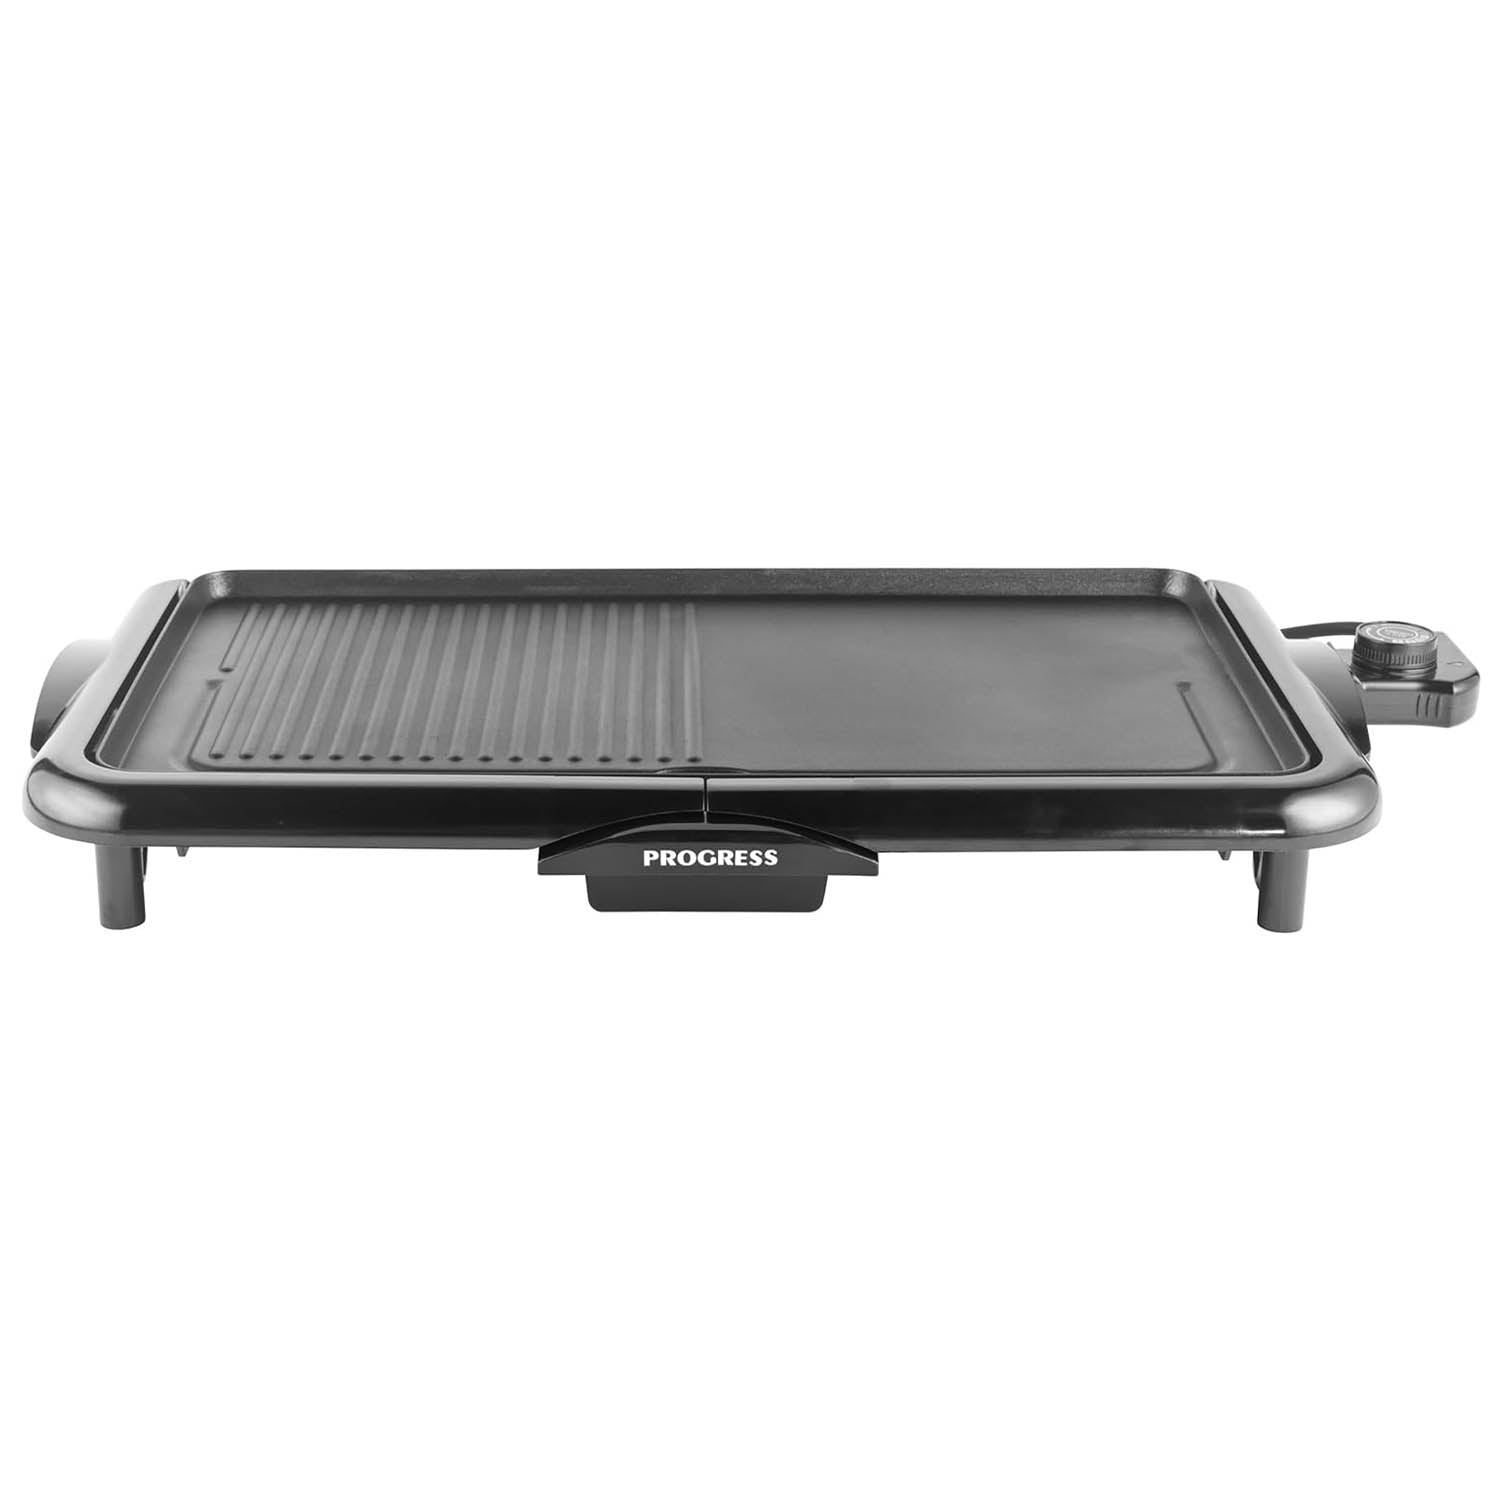 Progress 2000W Family Health Non-Stick Electric Grill & Flat Cooking Plate